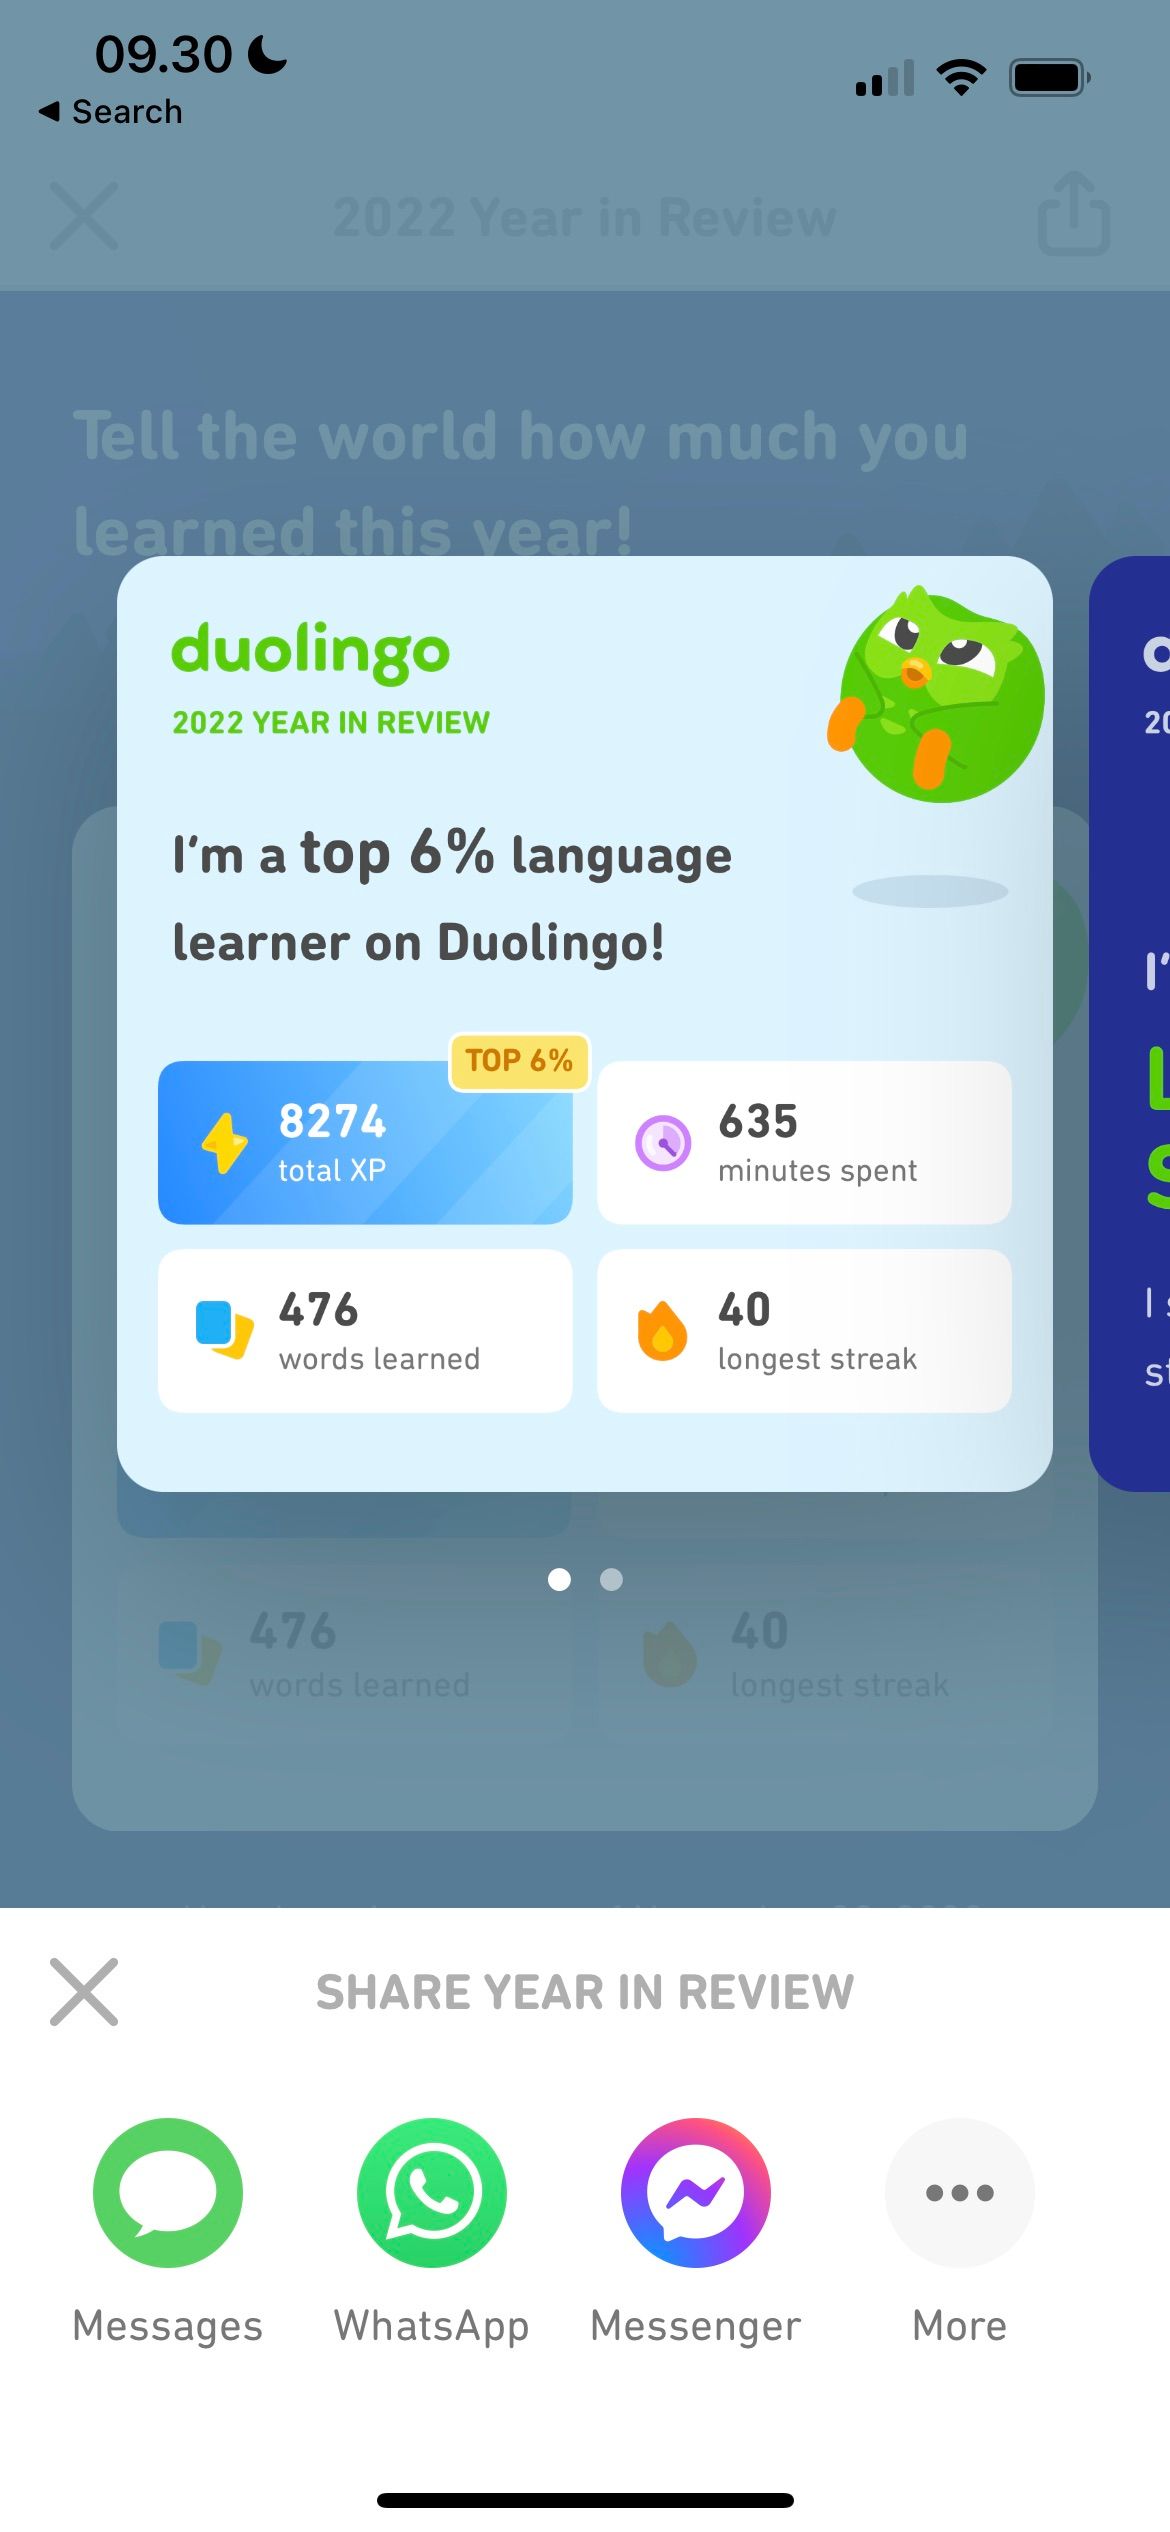 How to Access Your Duolingo Year in Review for 2022